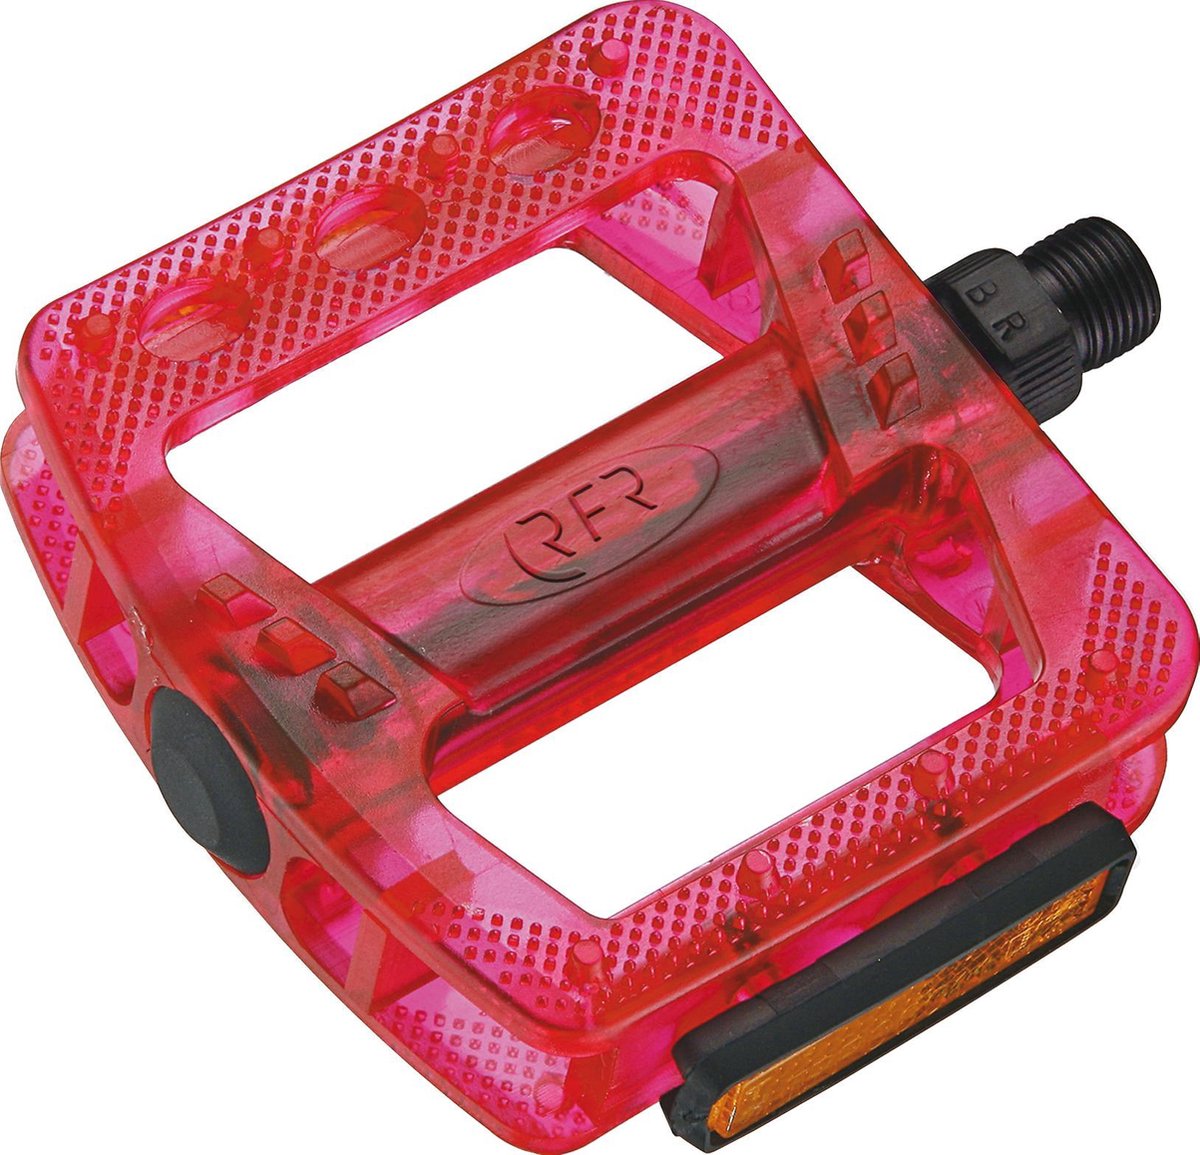 RFR PEDALS JUNIOR RED